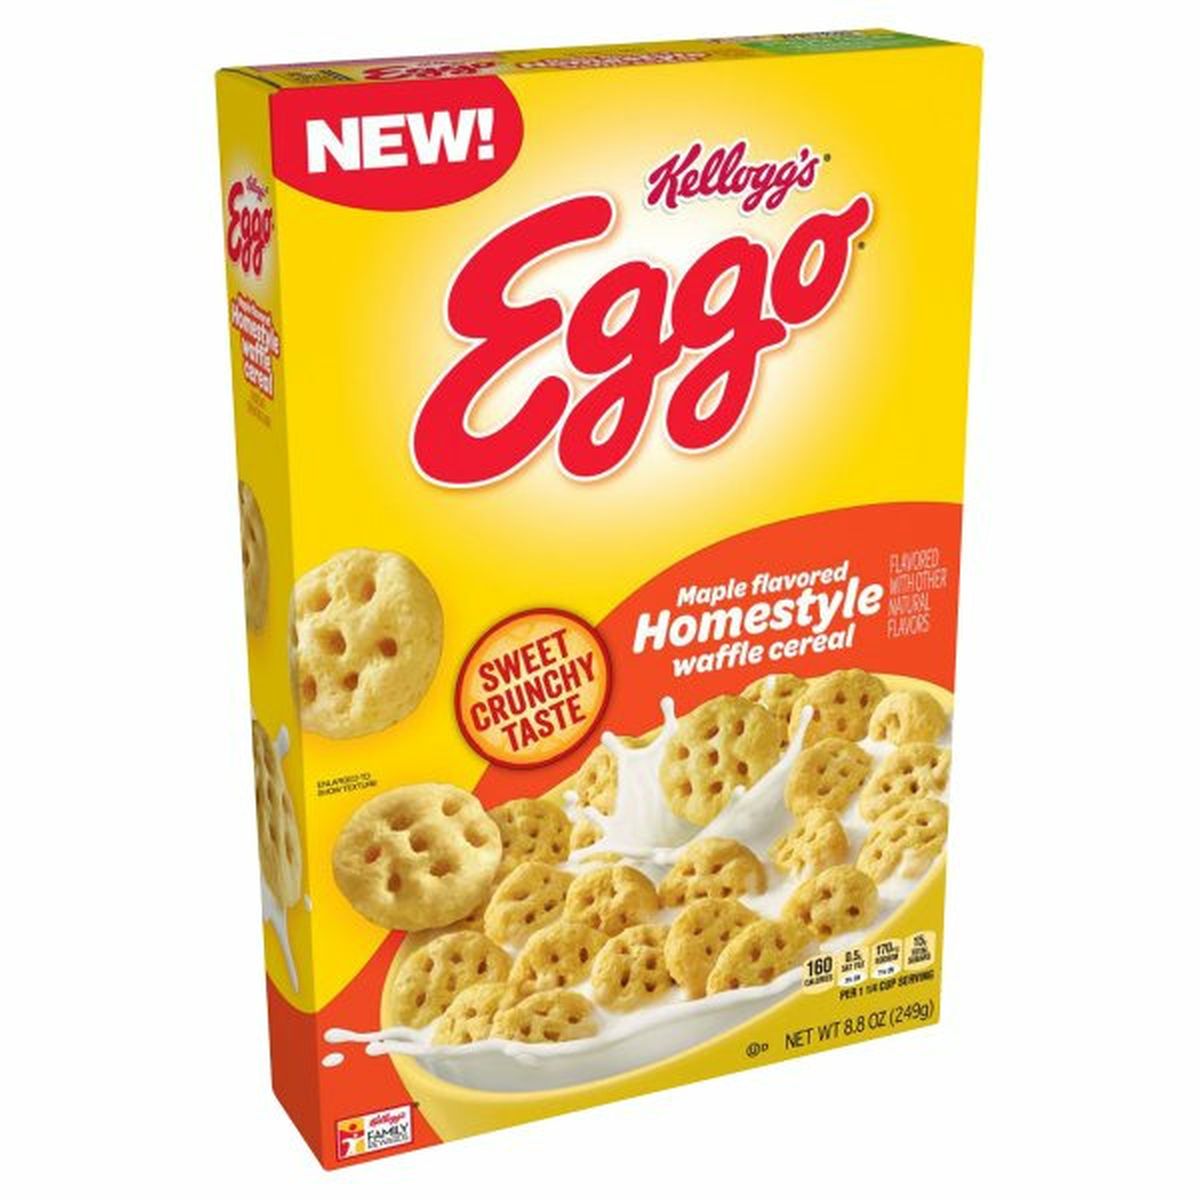 Calories in Eggo Cereal Kellogg's, Breakfast Cereal, Maple Flavored Homestyle Waffle, Good Source of 8 Vitamins and Minerals